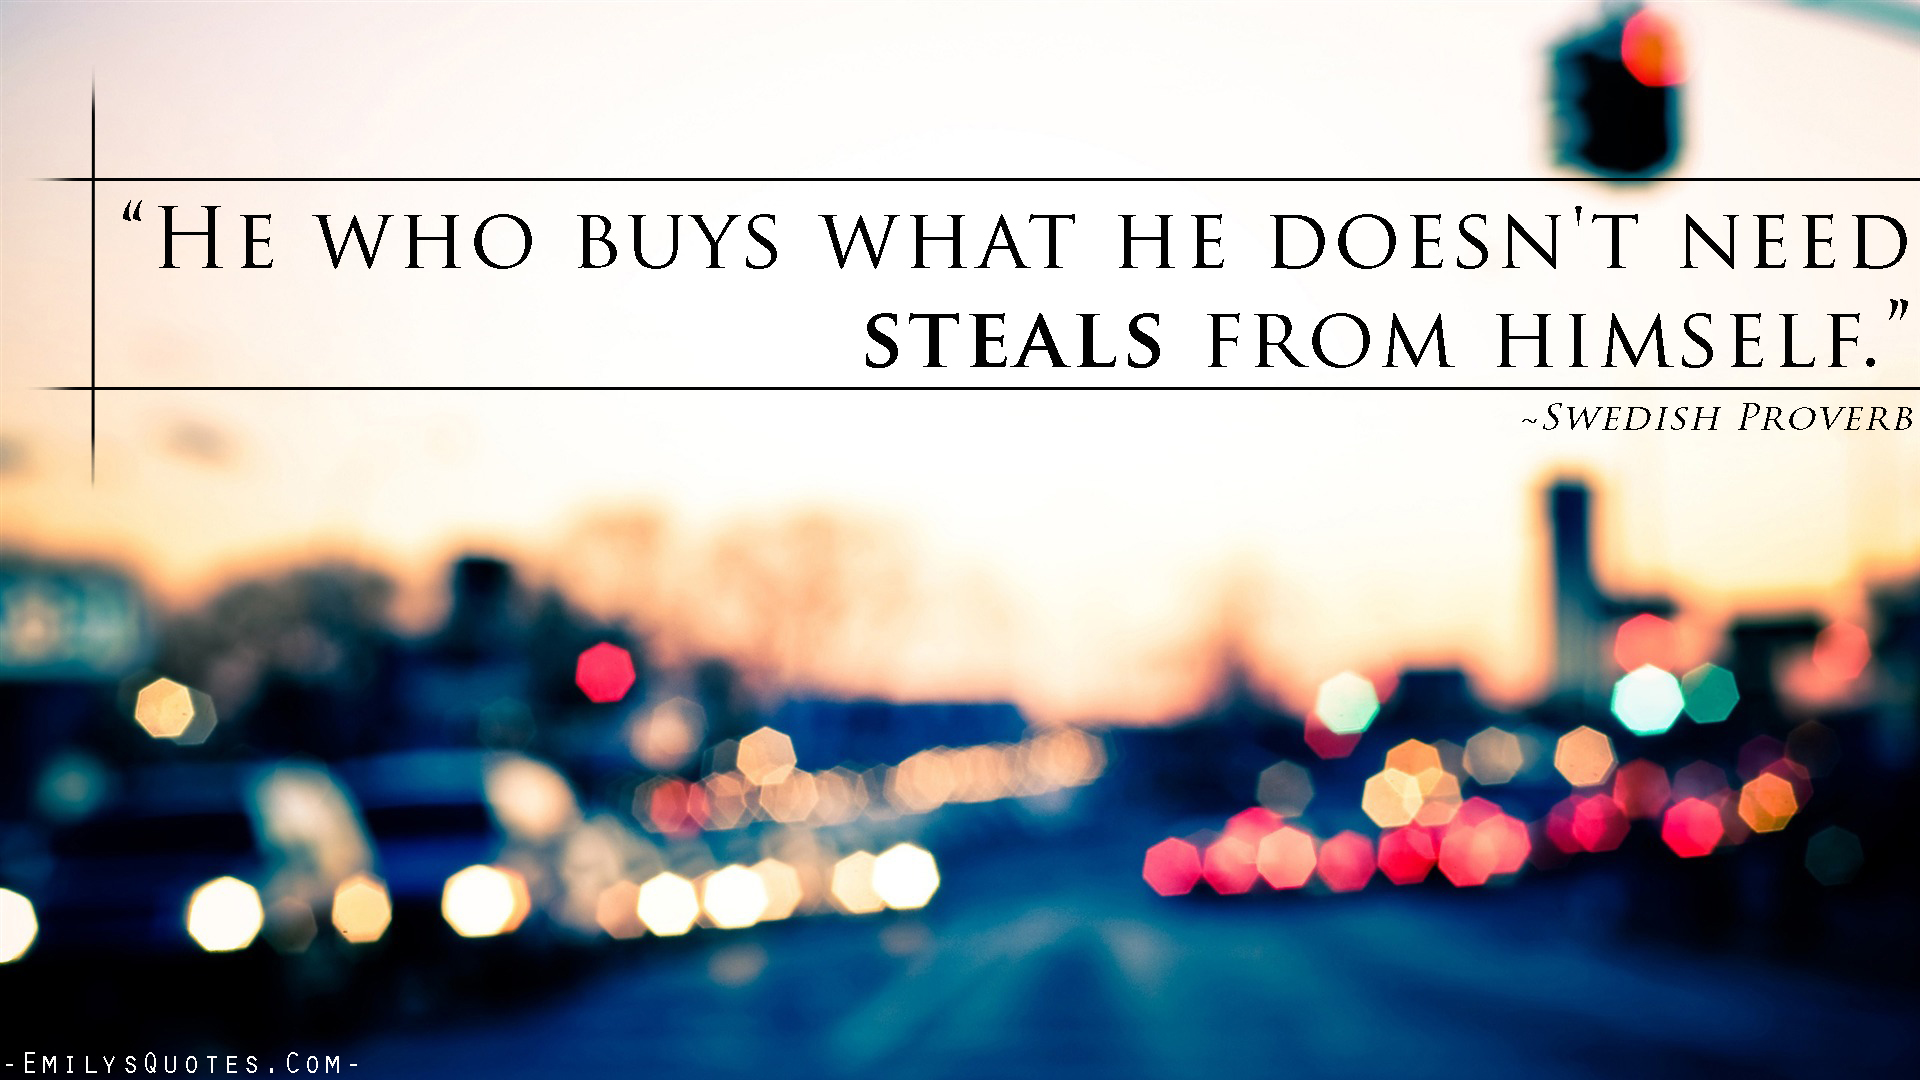 He who buys what he doesn’t need steals from himself